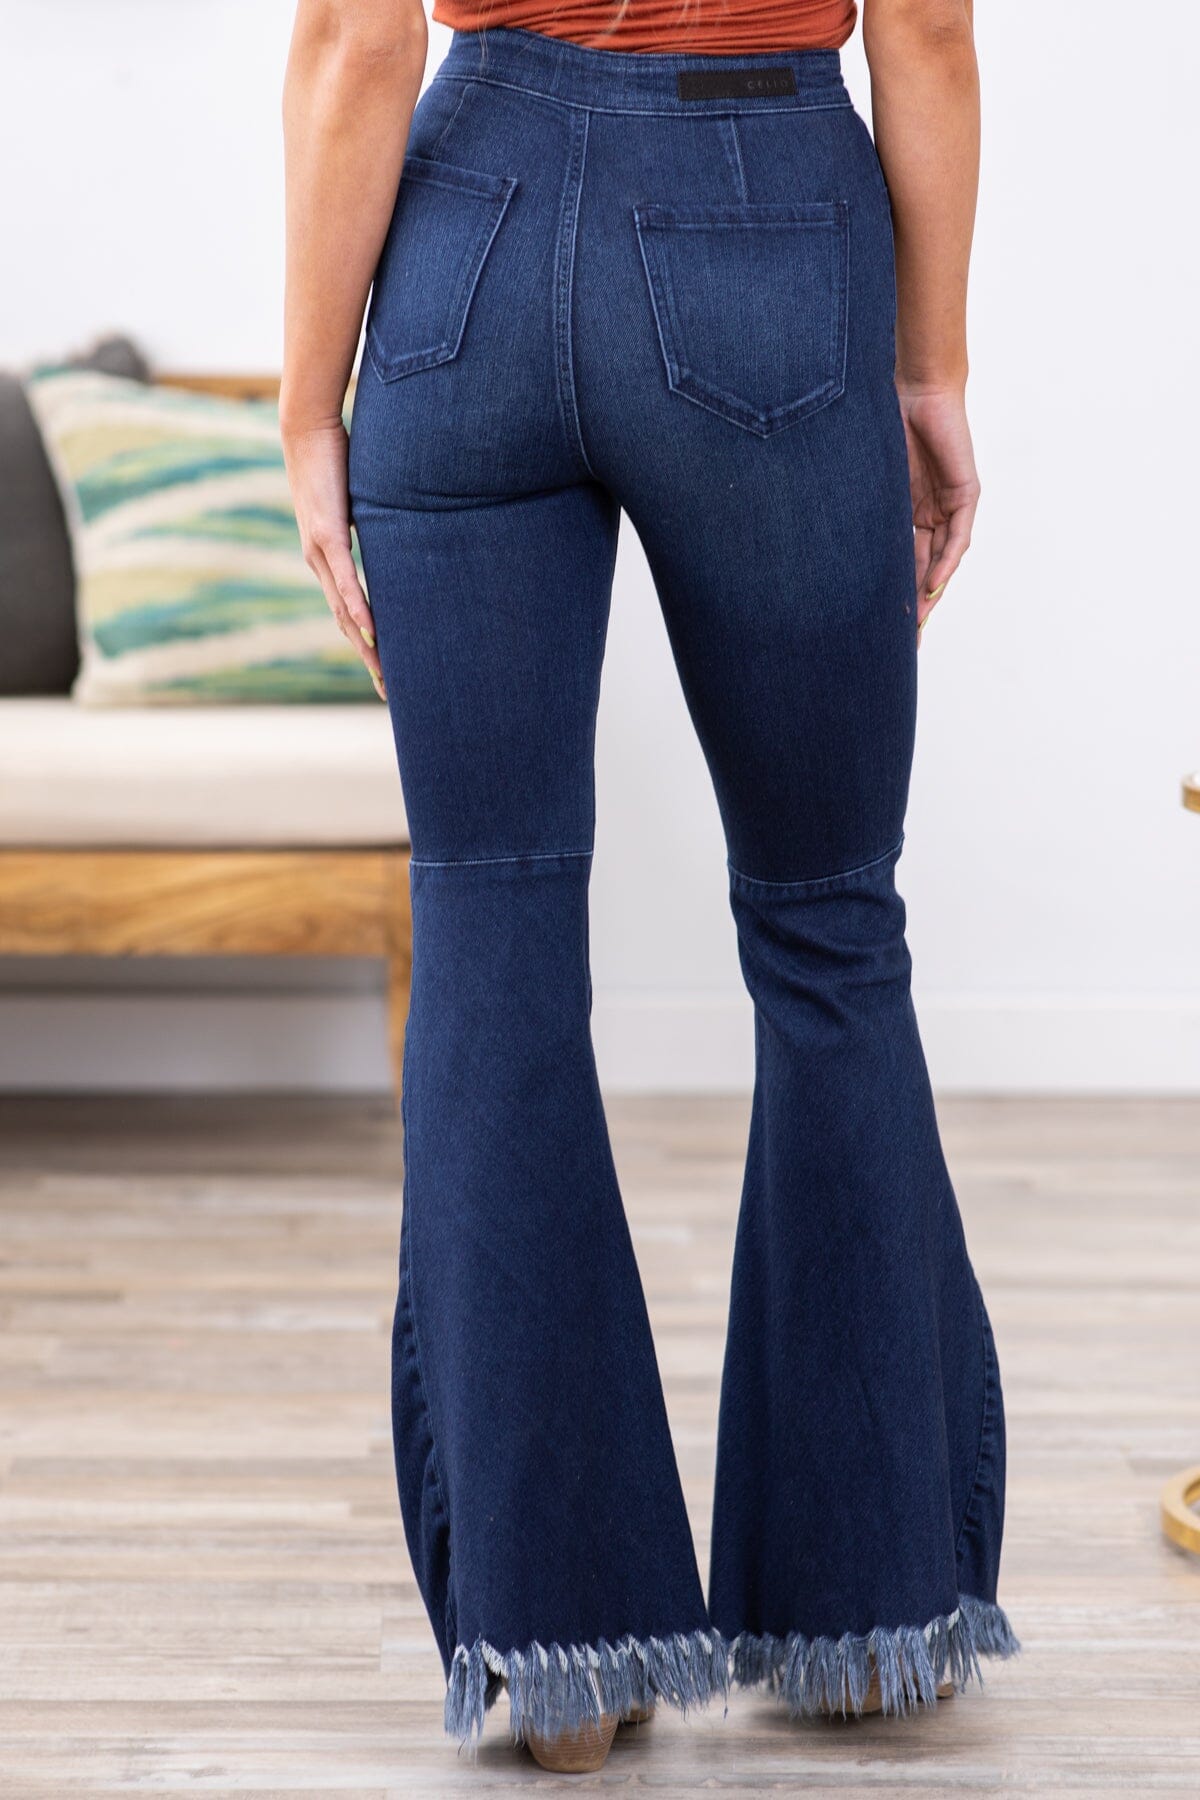 Cello High Rise Fray Hem Flare Jeans - Filly Flair